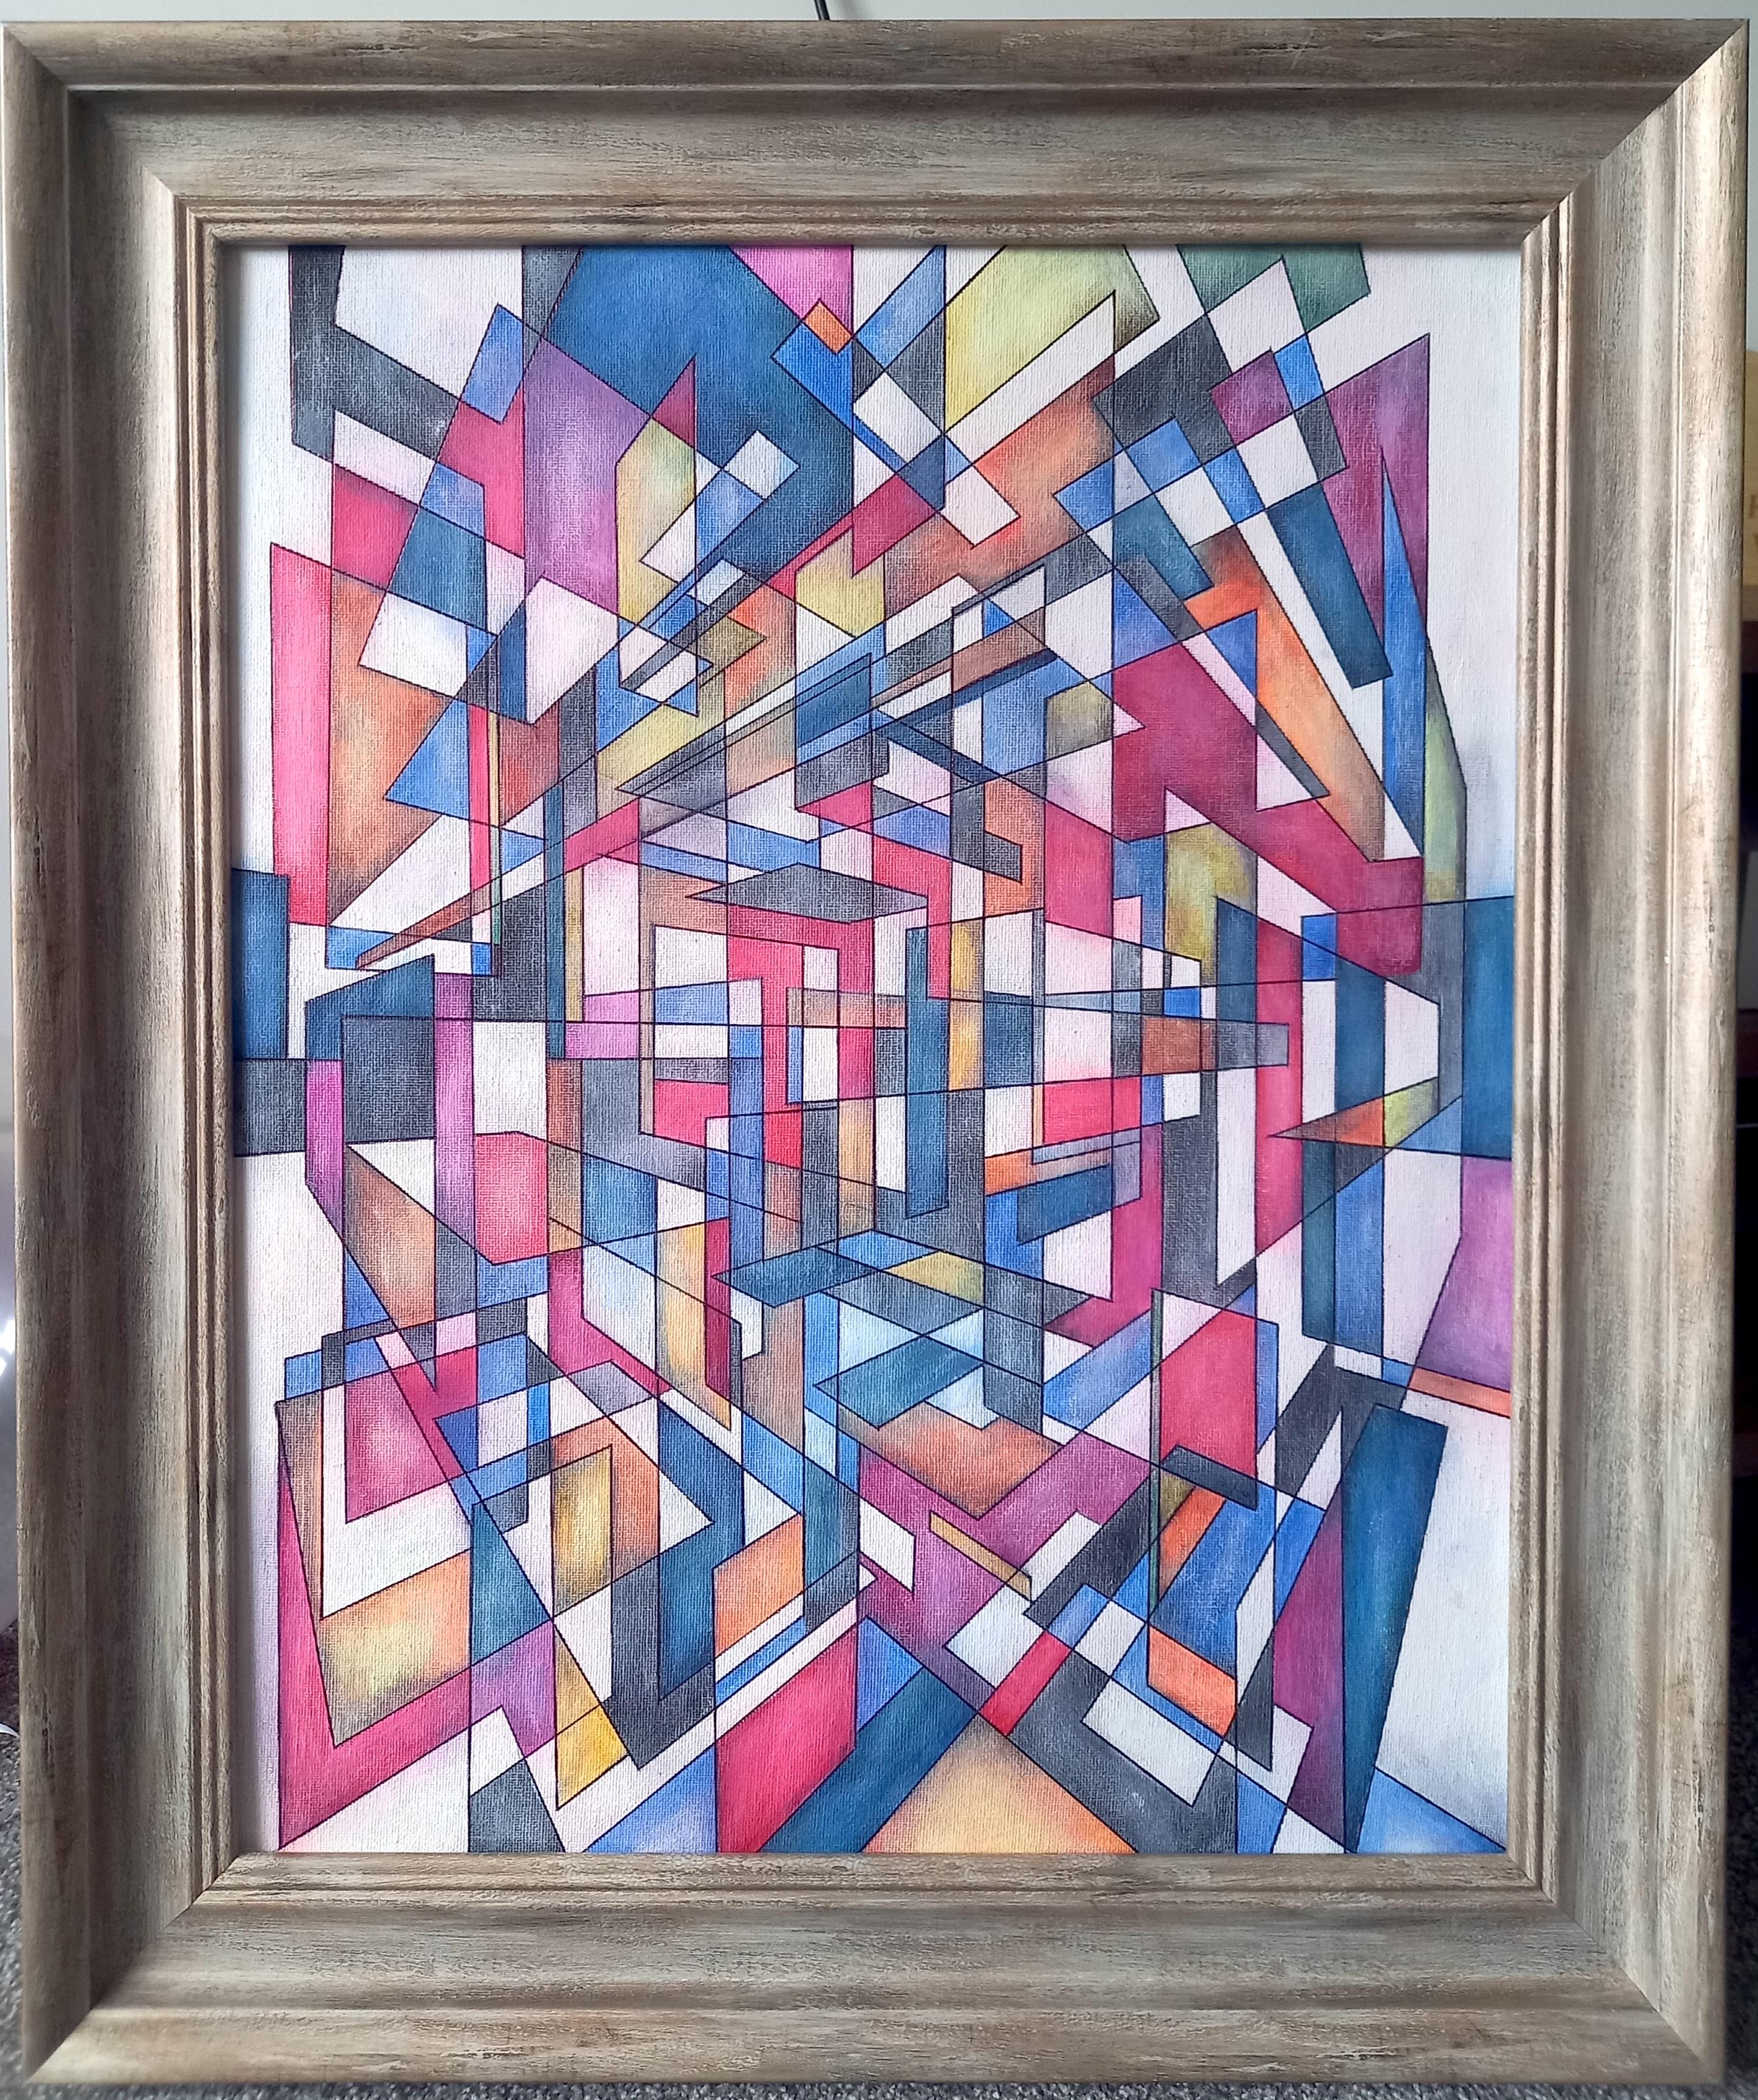 Contemporary abstract oil on board by Christopher Barrow
Frame included
Signed